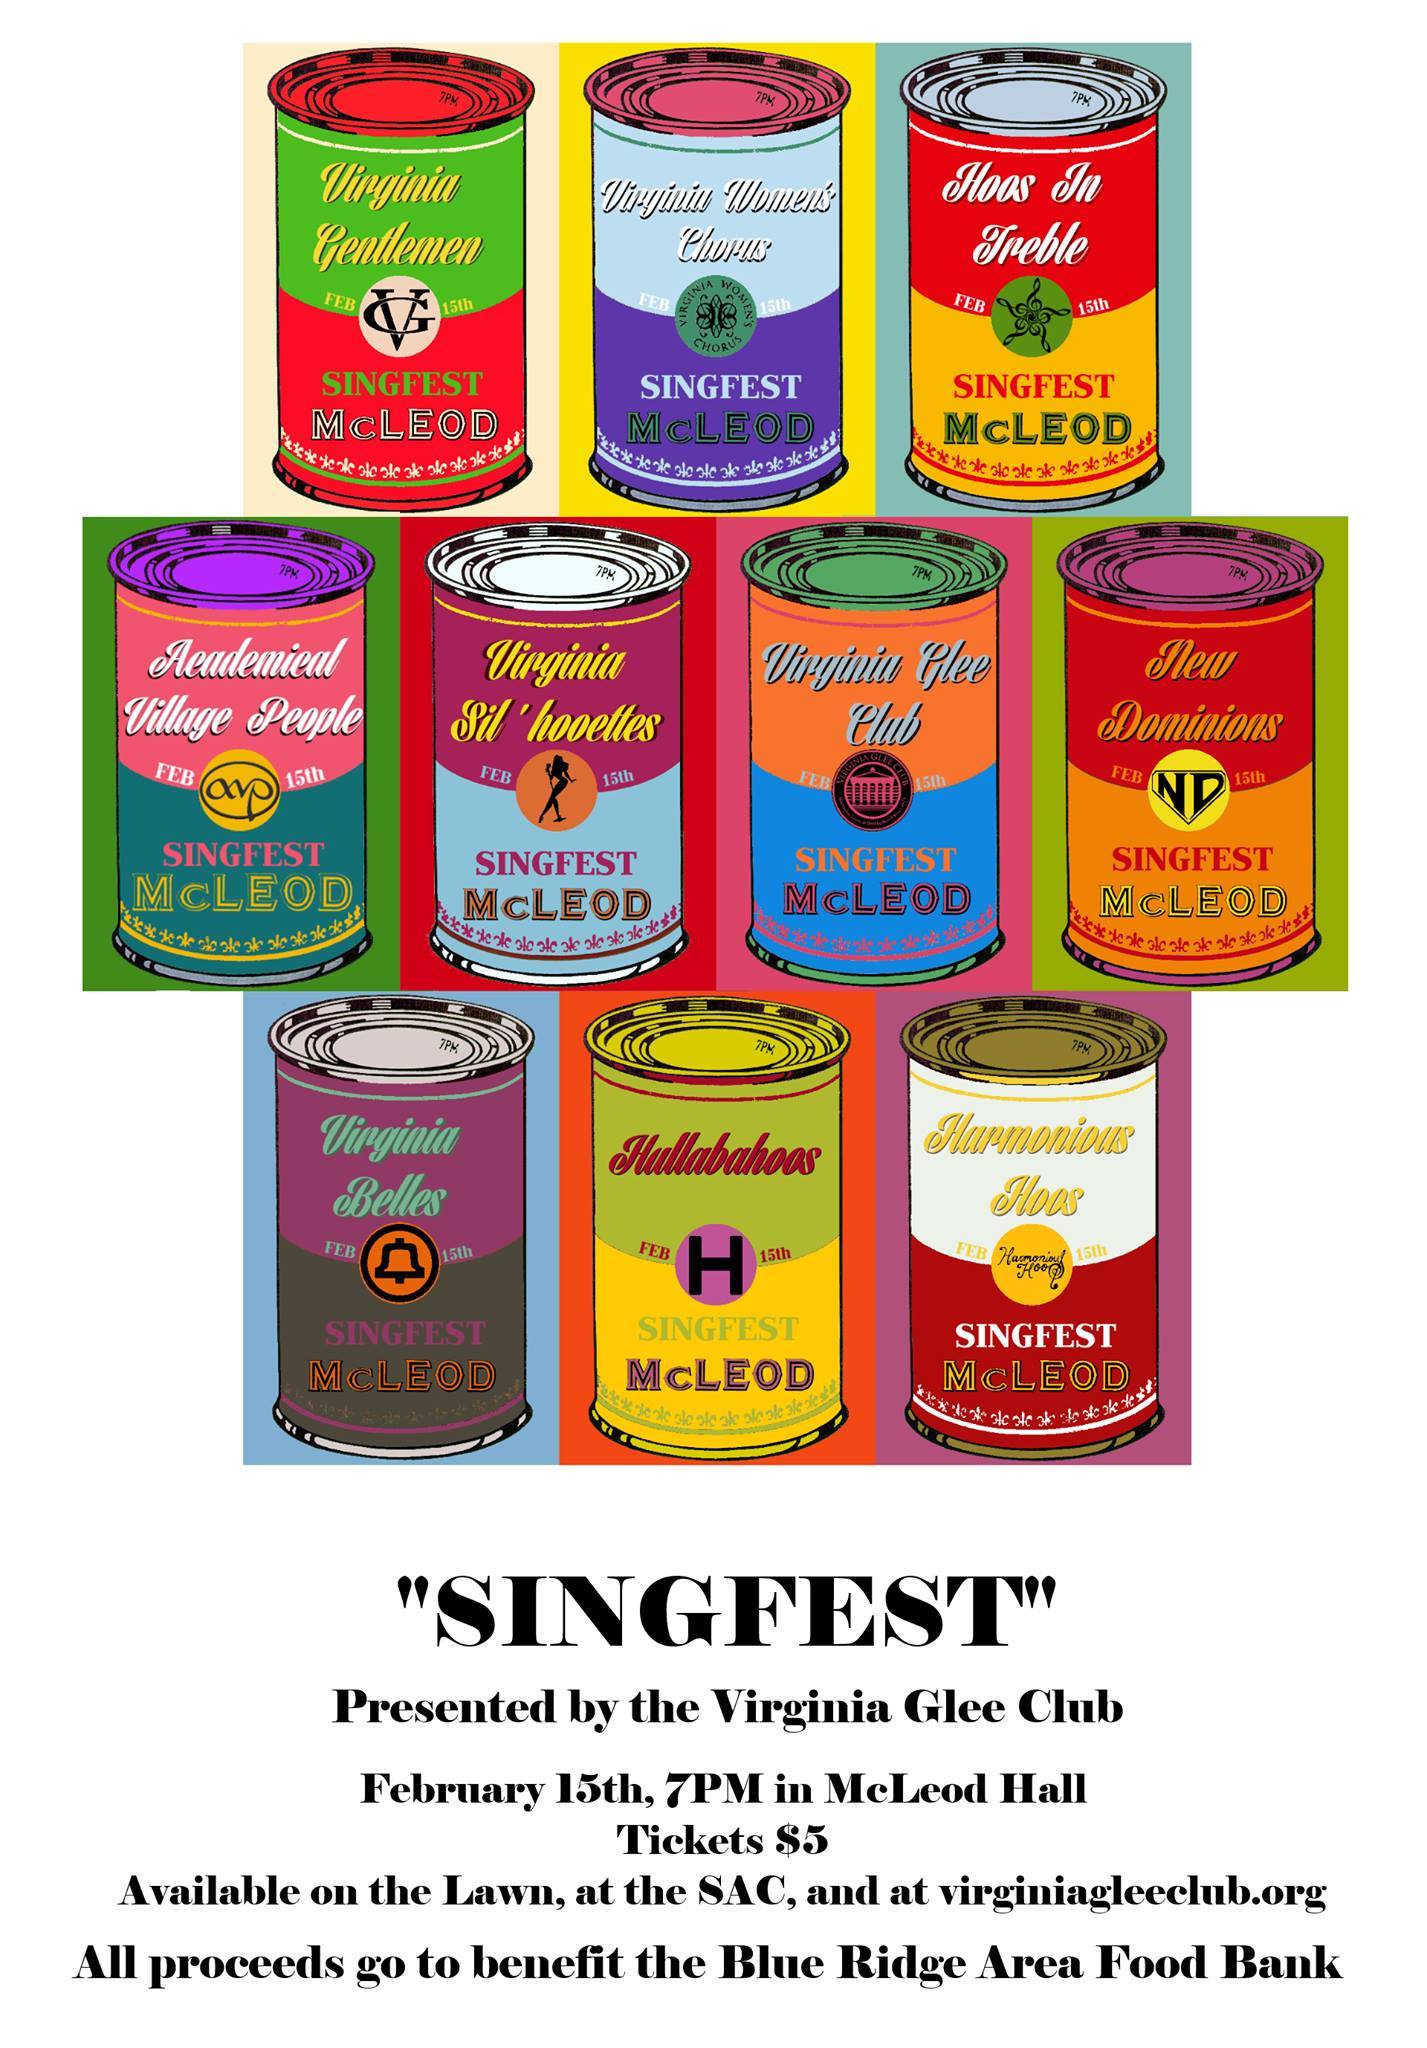 Illustration of various cans of food